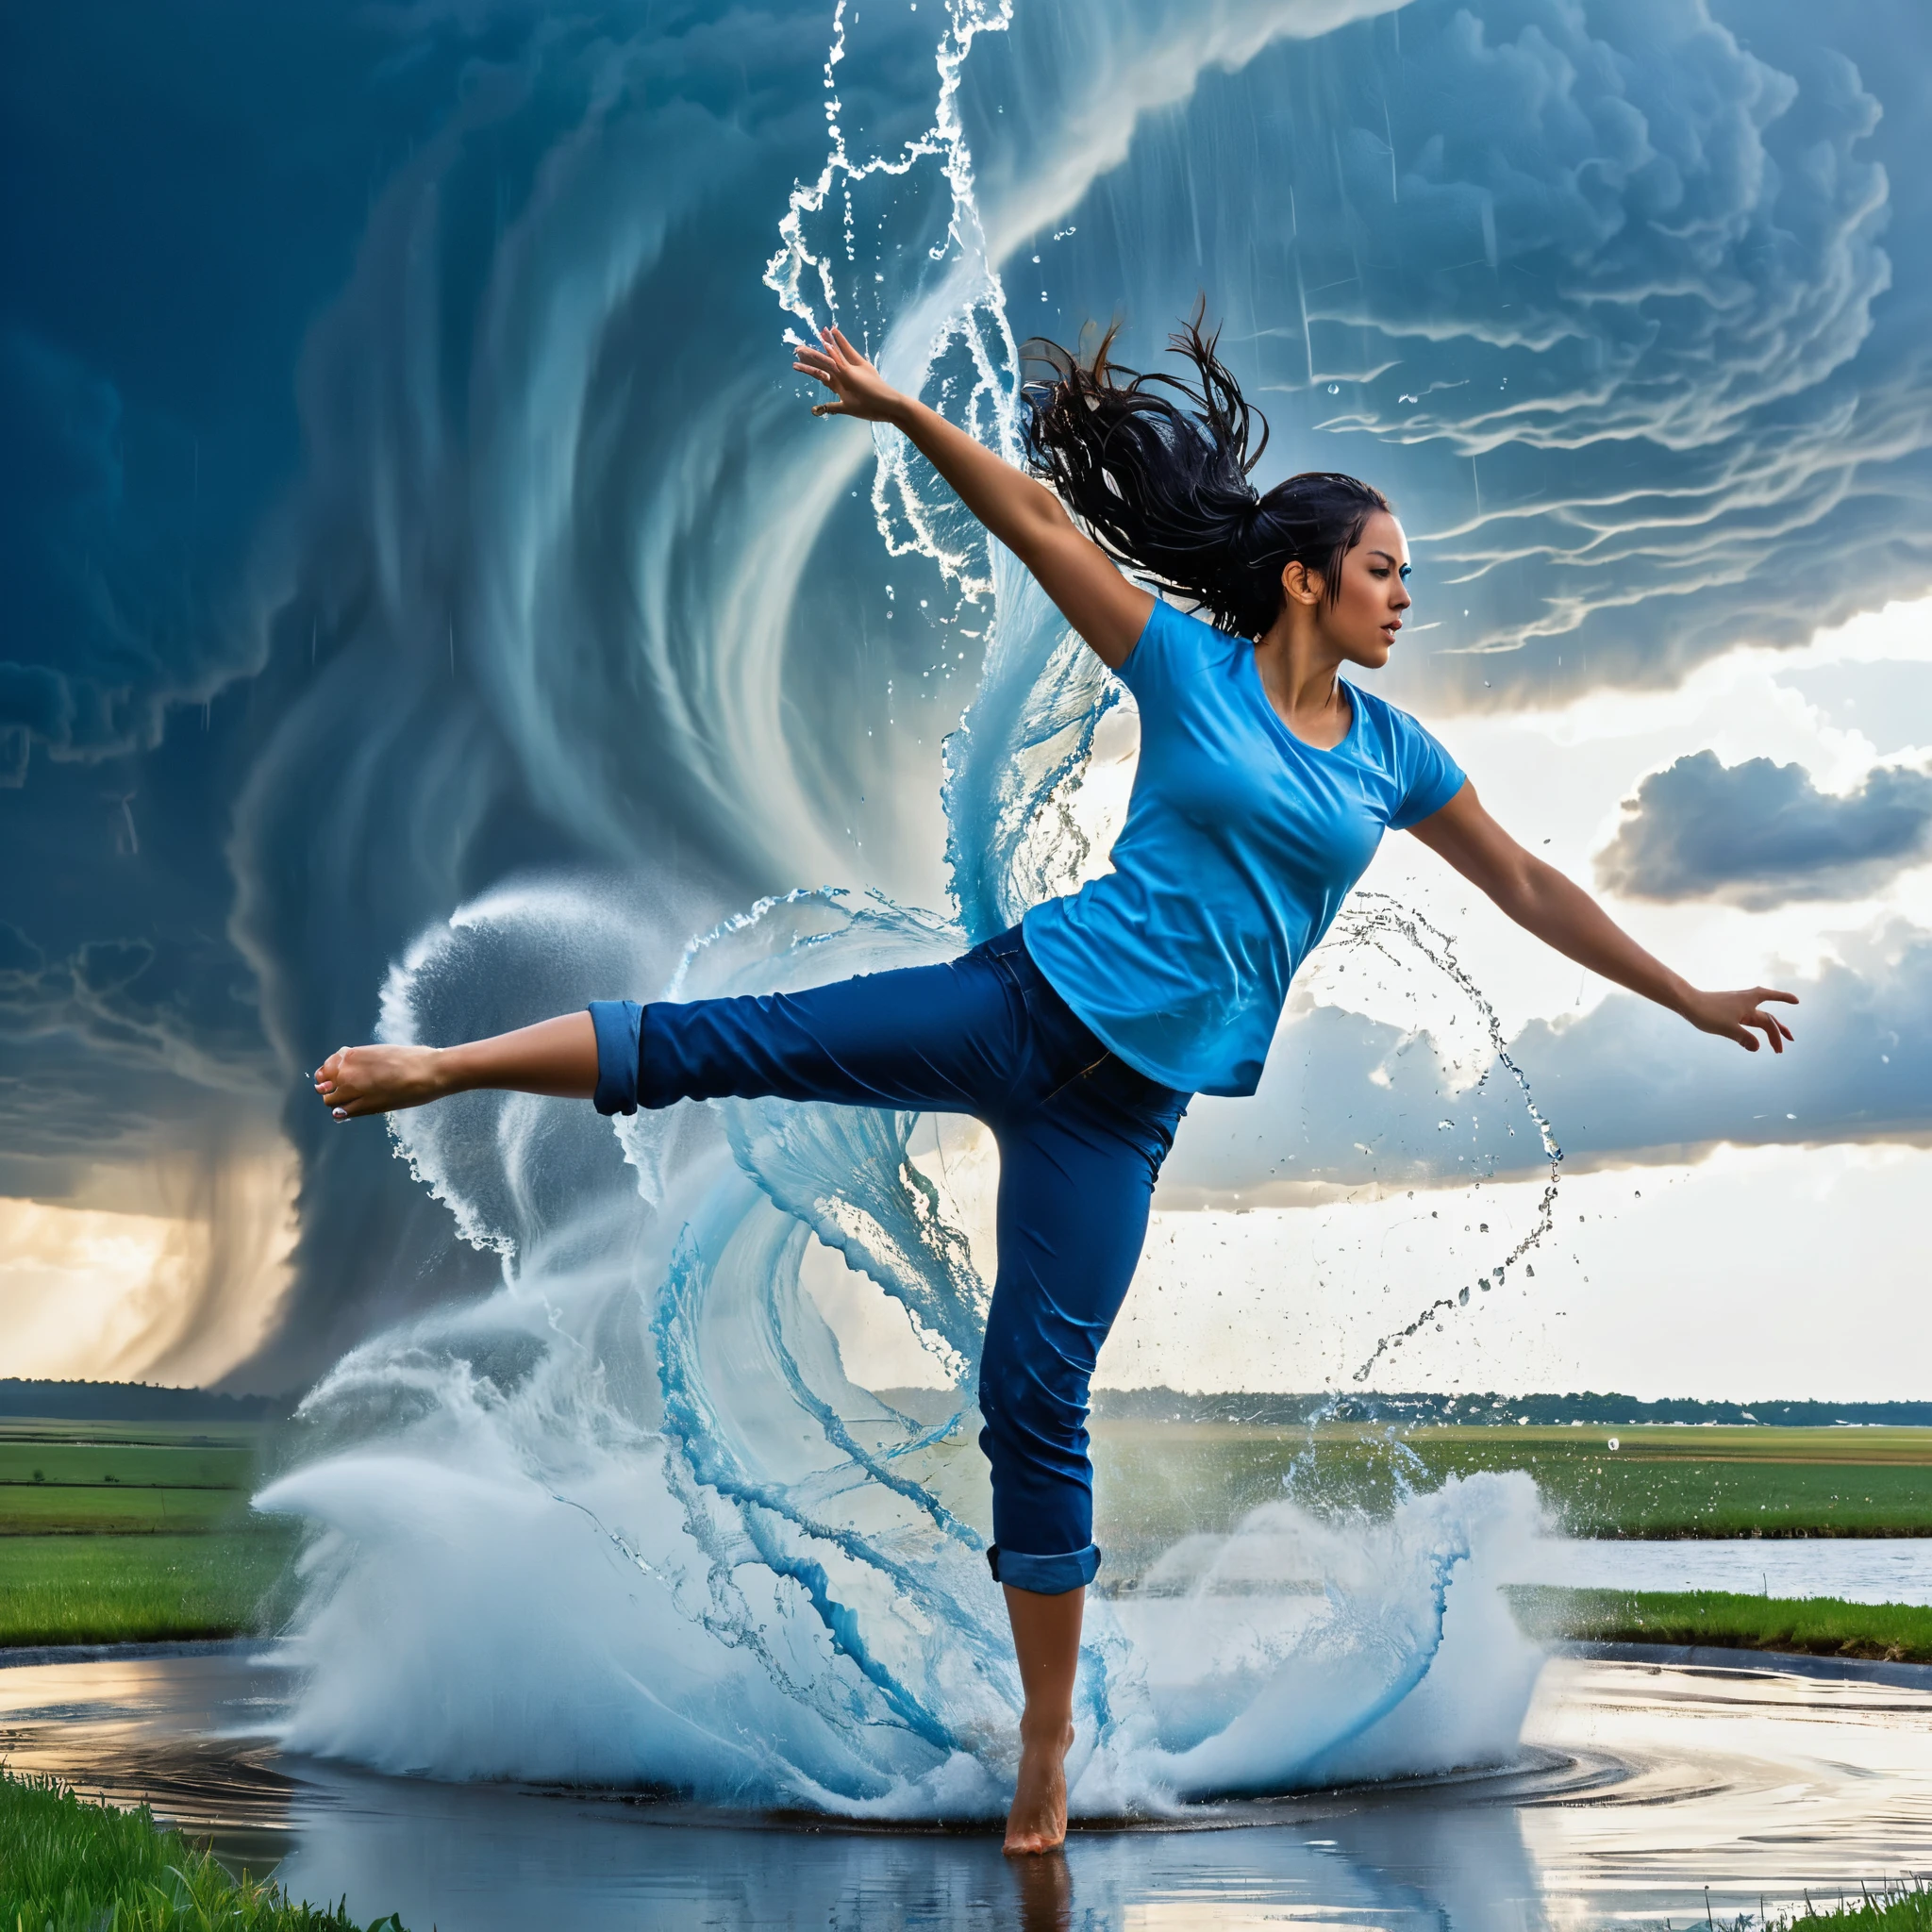 A dynamic scene of a young woman with long, flowing blue hair tied back, wearing a light blue shirt and dark blue rolled-up pants, performing a high kick against a massive water tornado. The water tornado, with a spiraling structure, is bursting and splashing dramatically upon impact with her foot. The setting is an open area with a clear blue sky and some clouds in the background. The sunlight reflects off the water droplets, creating a sparkling effect. The overall scene conveys a sense of strength, action, and fluidity. hyper realistic photo, vibrant color, 16k